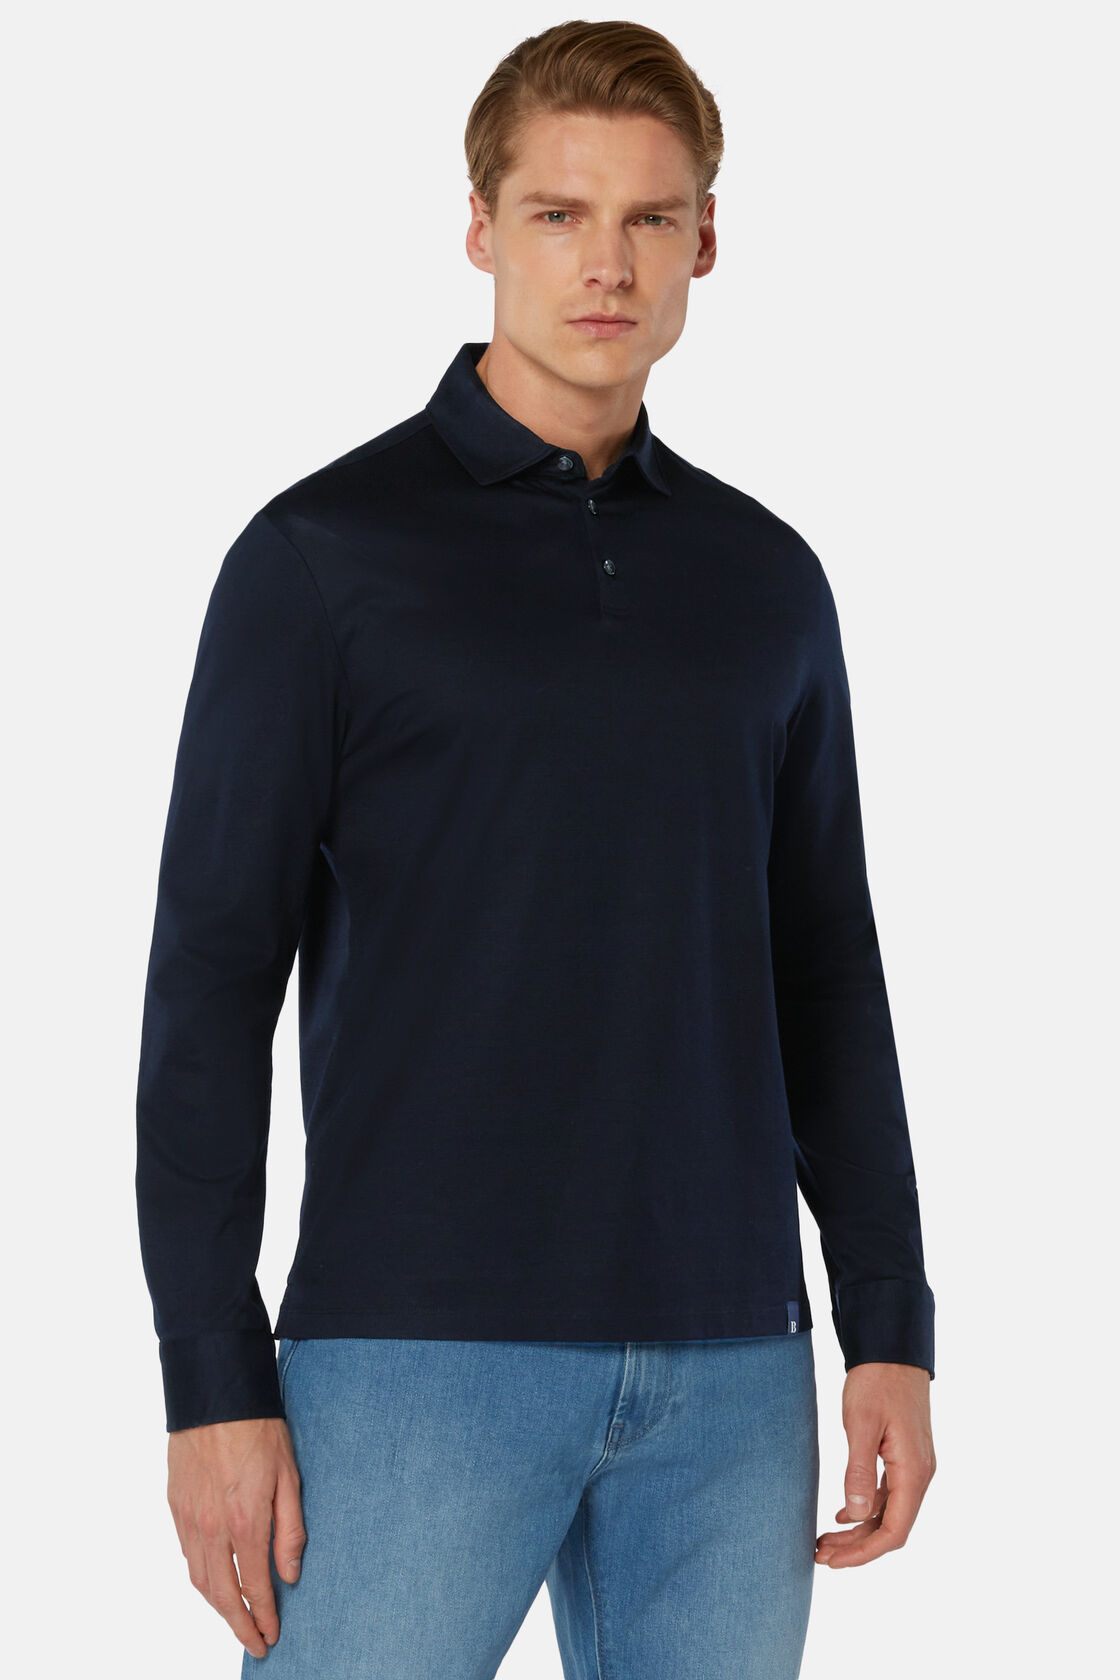 Polo In Jersey Di Cotone Pima Regular Fit Manica Lunga, Navy, hi-res